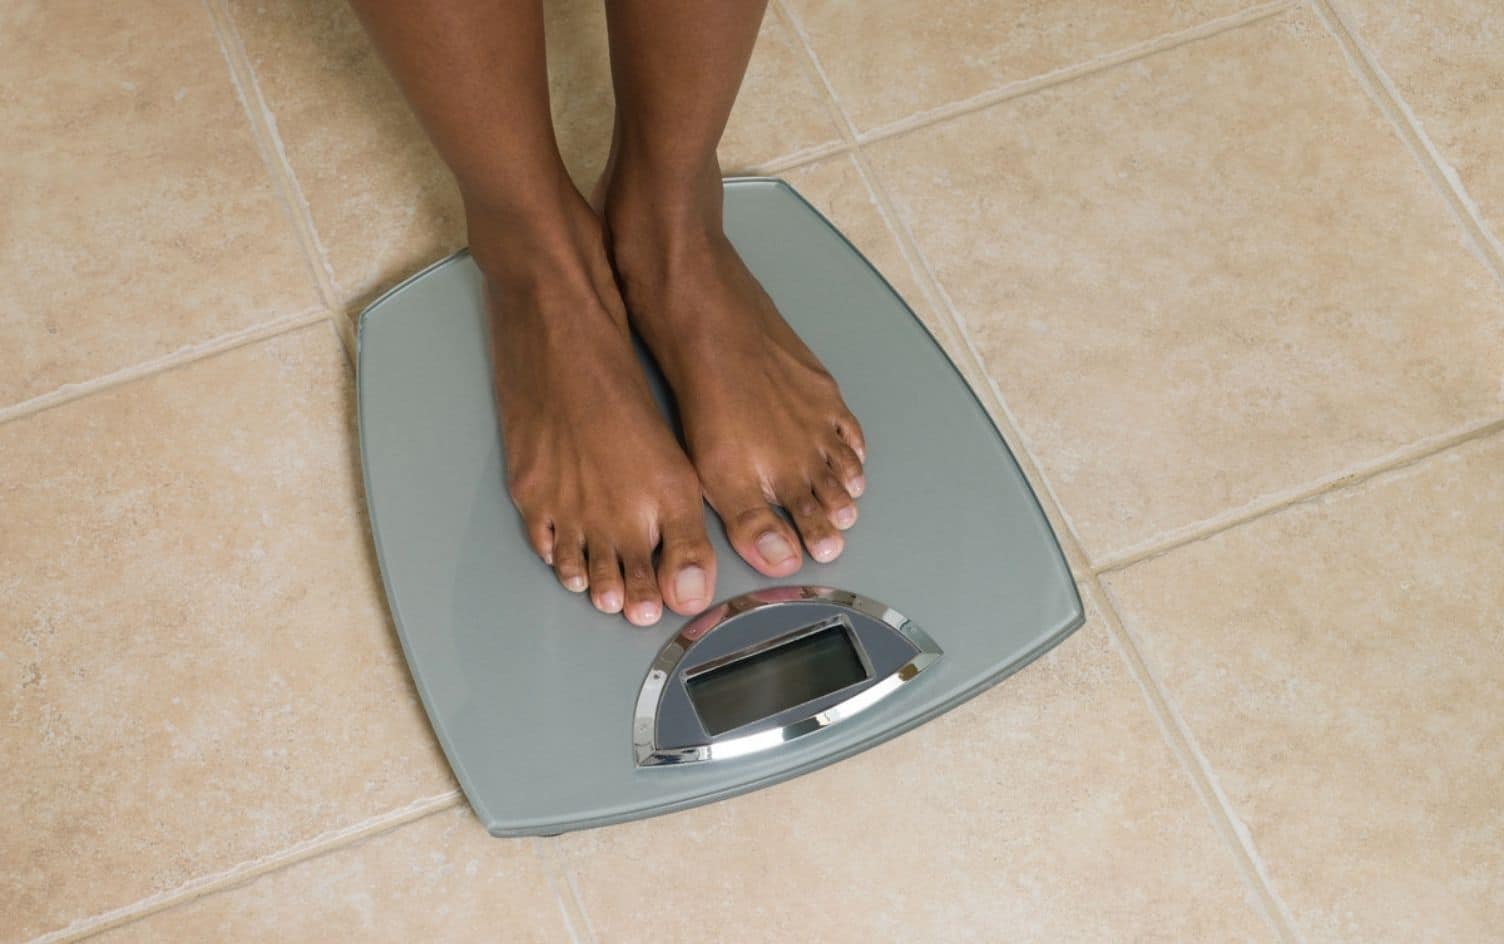 Don't let the number on body weight scale discourage you!, by Fitnessfi